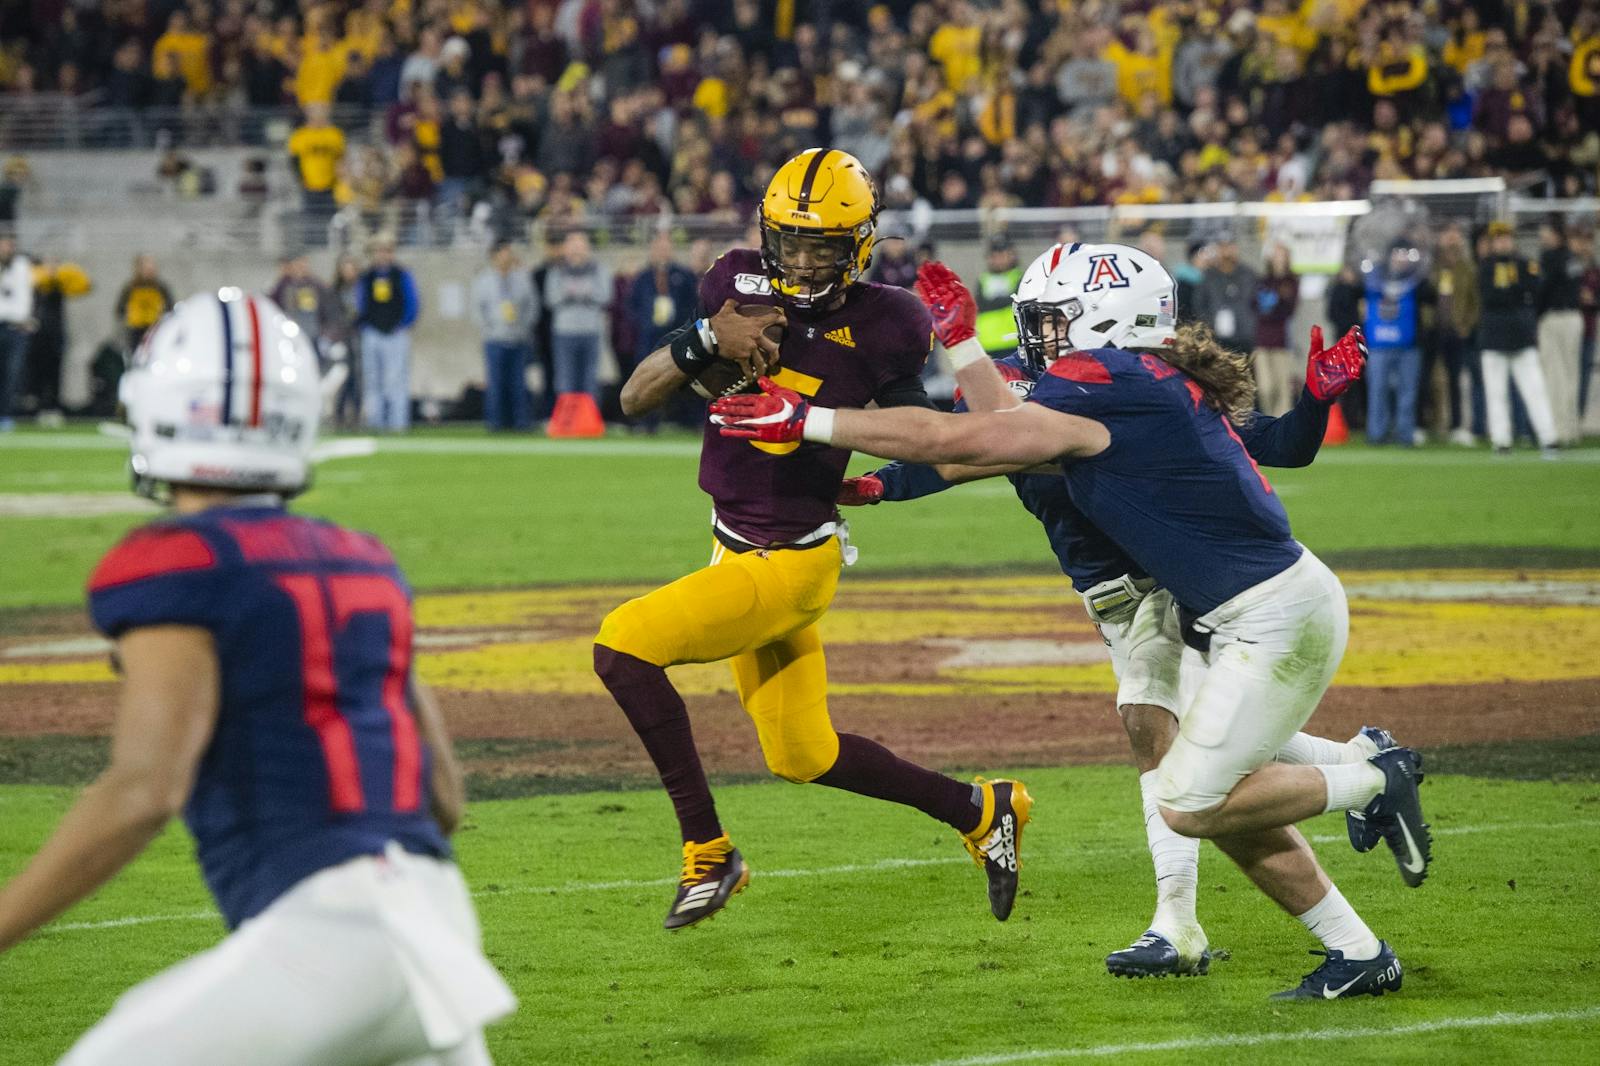 ASU football looks to earn fifth straight Territorial Cup win against